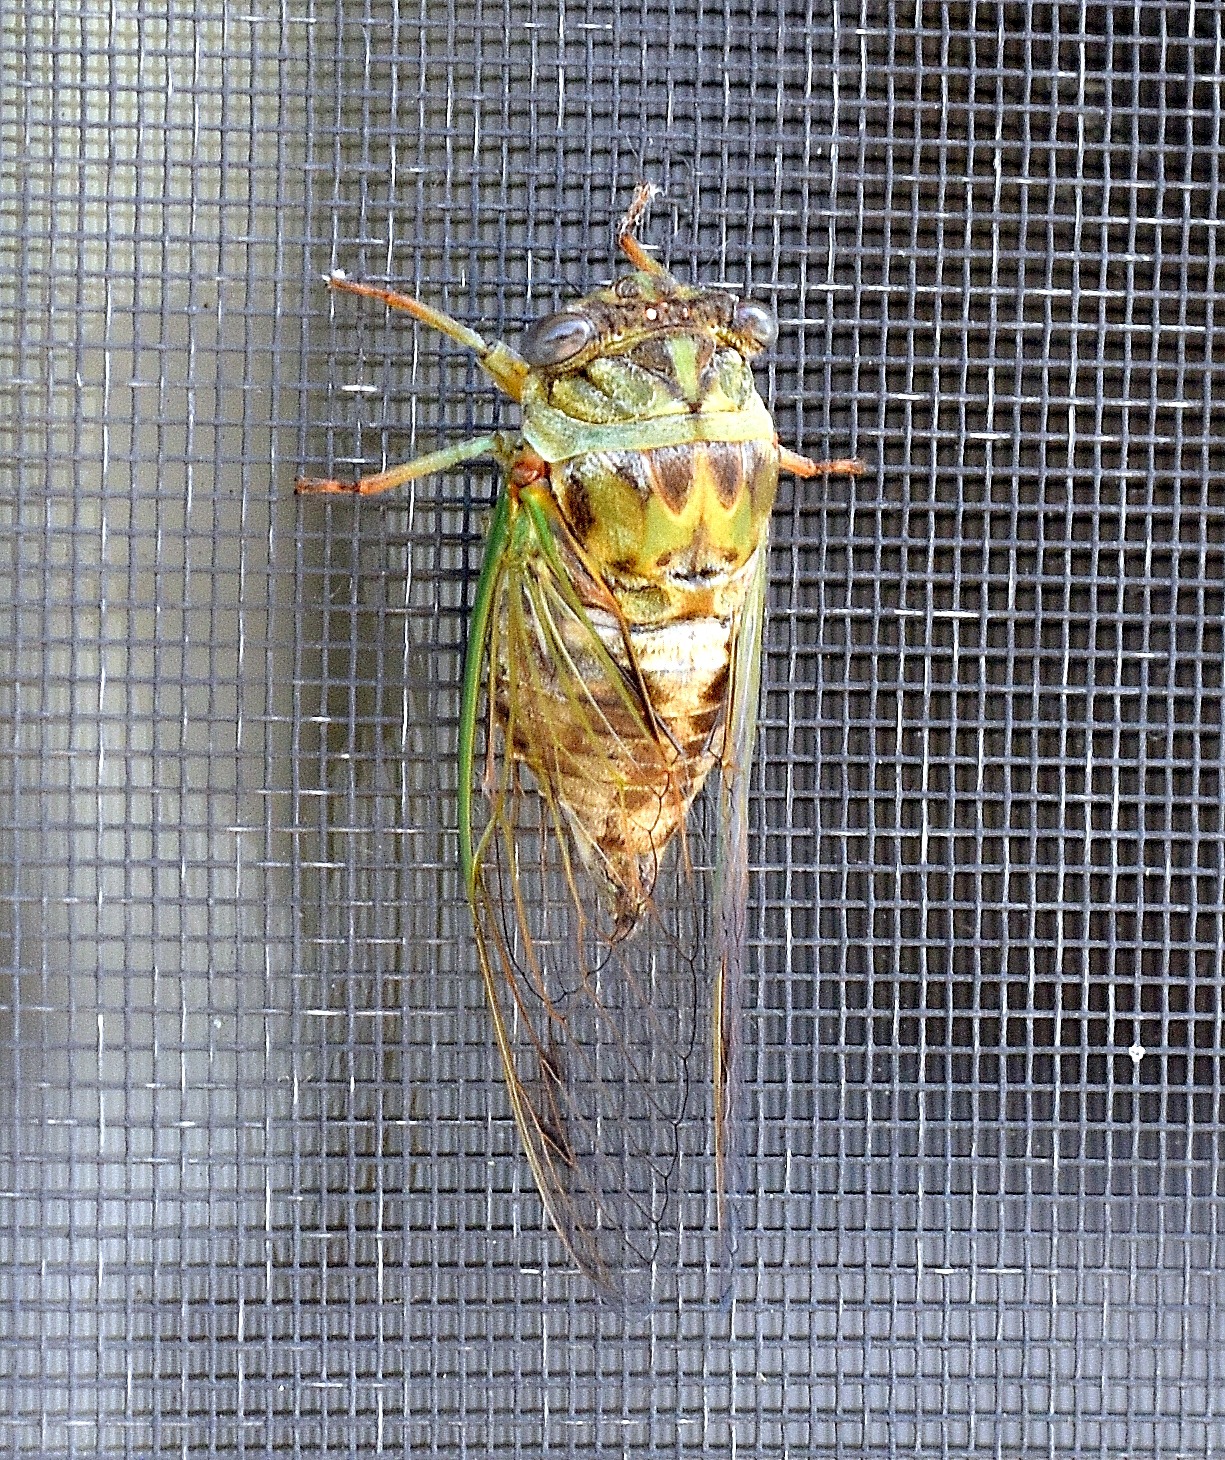 A cicada on my screen | image tagged in cicada,kewlew | made w/ Imgflip meme maker